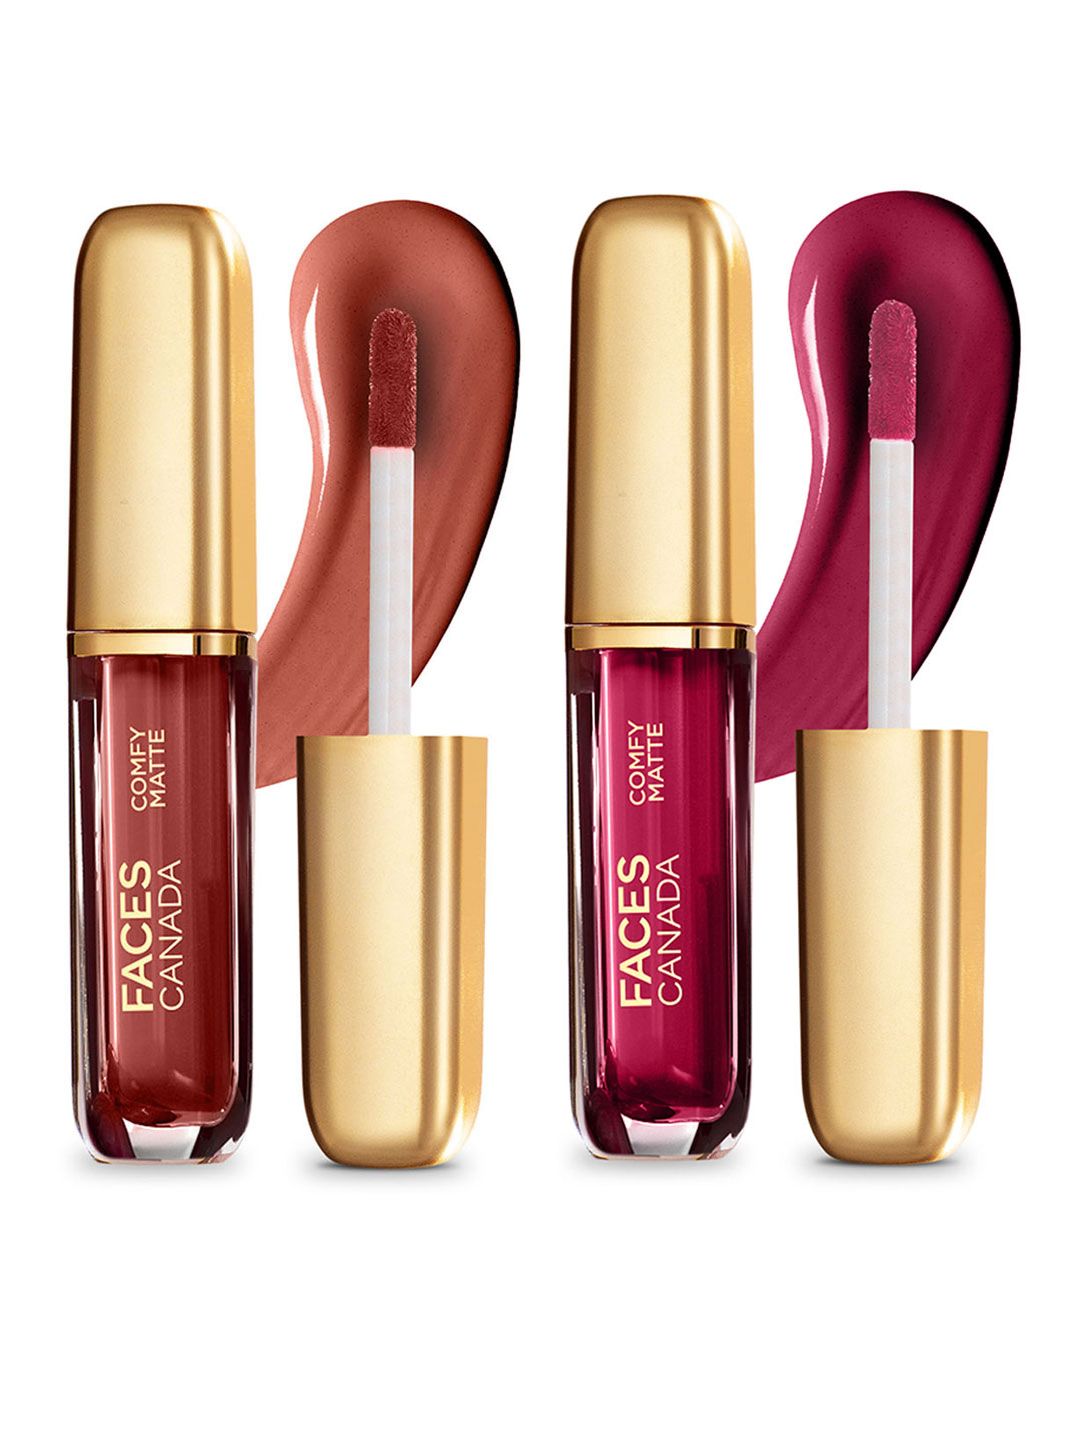 FACES CANADA Set of 2 Comfy Matte Lip Colors 3 ml Each - Any Day Now 04 & For The Win 08 Price in India